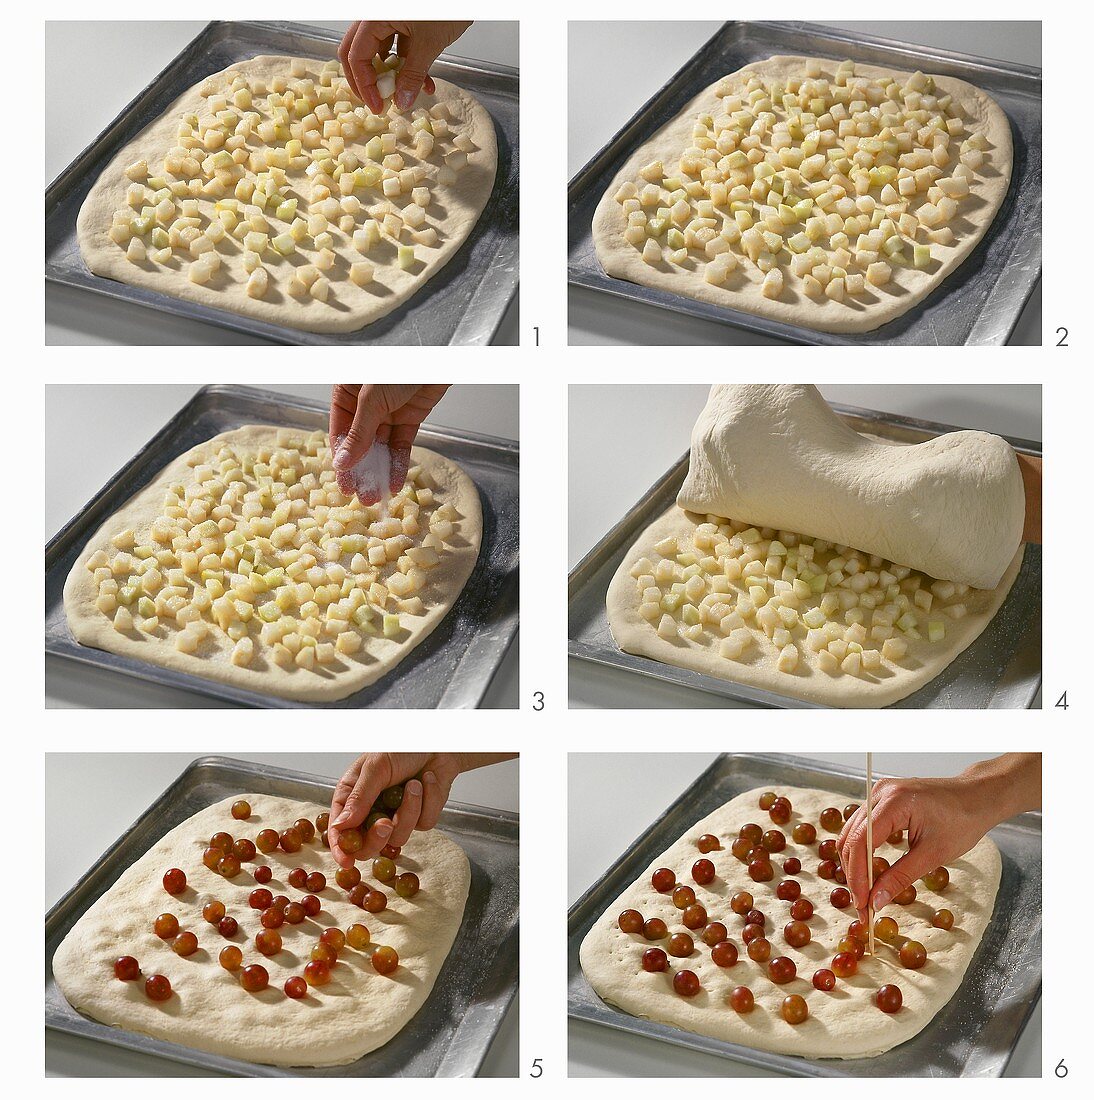 Making pear flatbread with grapes